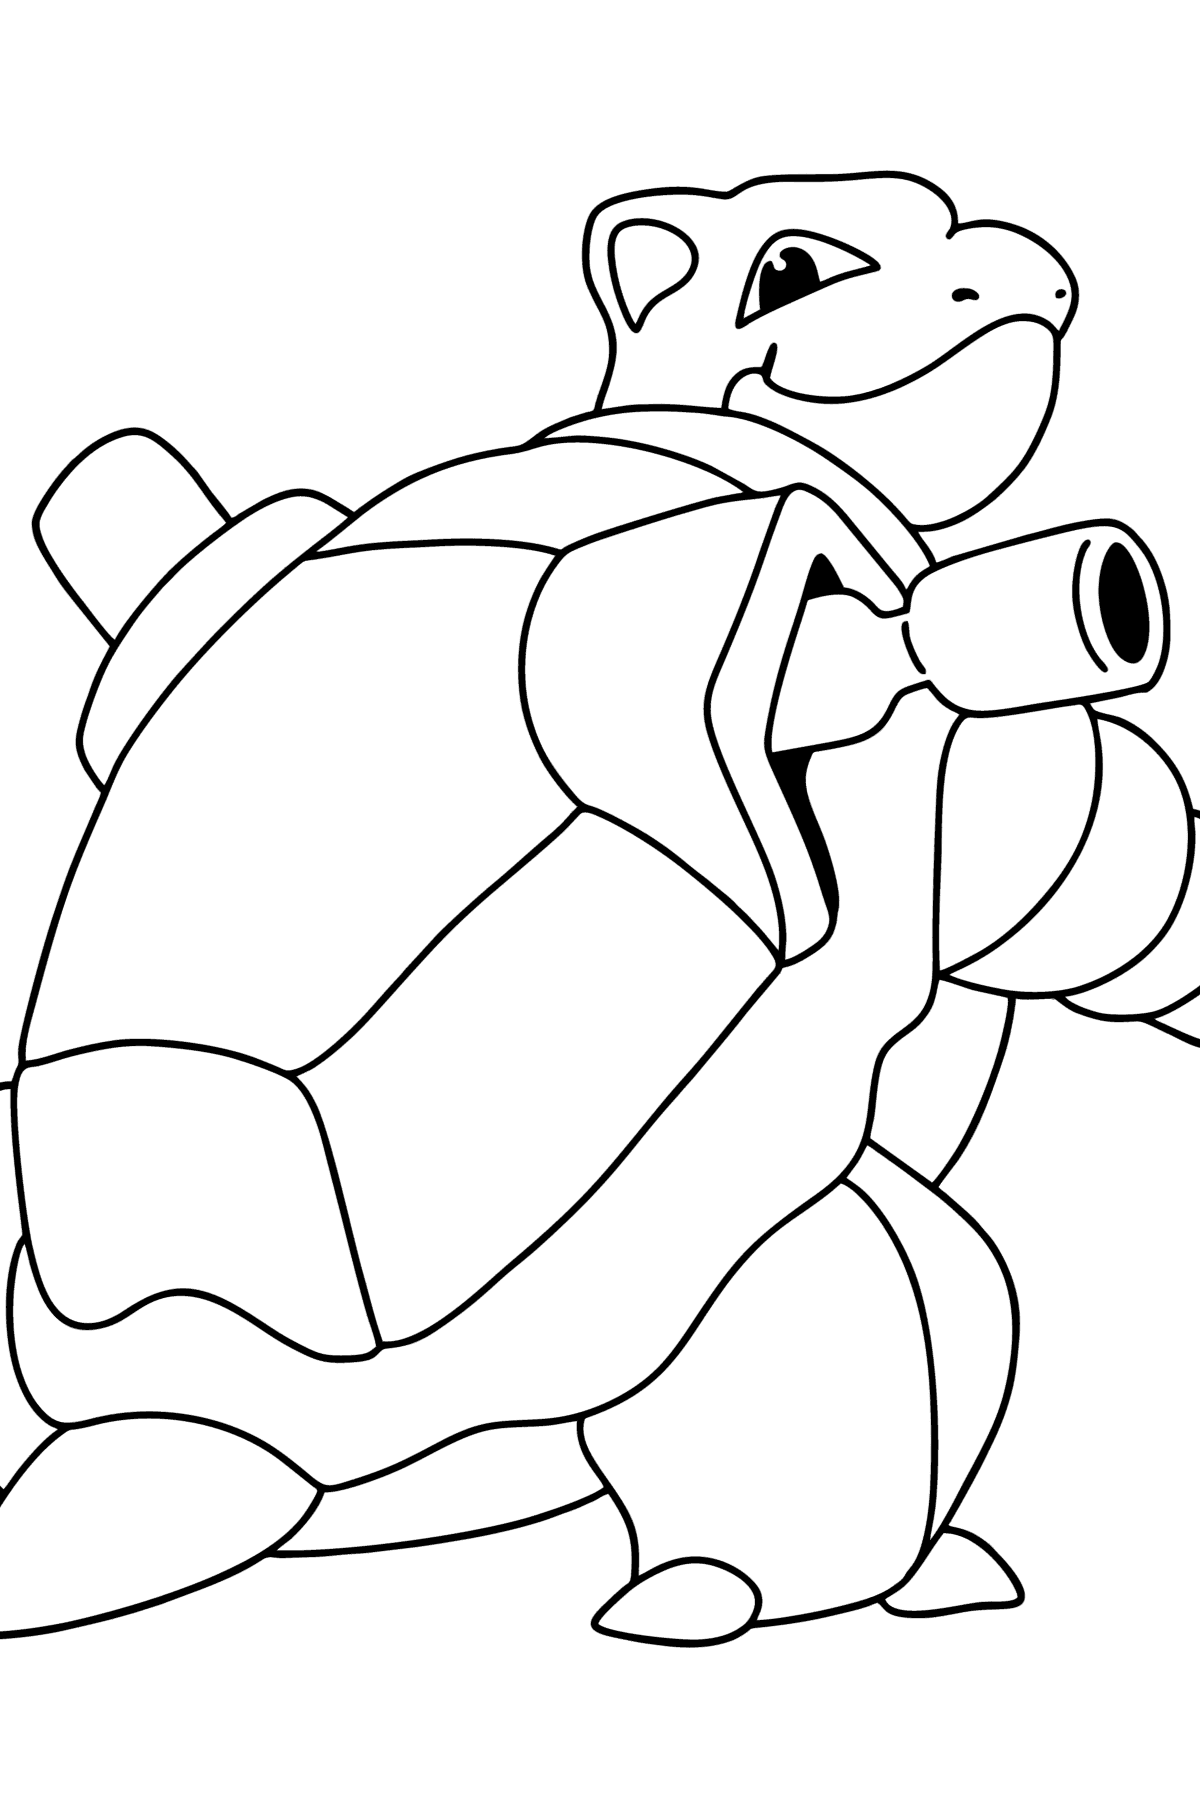 Pokémon Go Blastoise coloring page - Coloring Pages for Kids